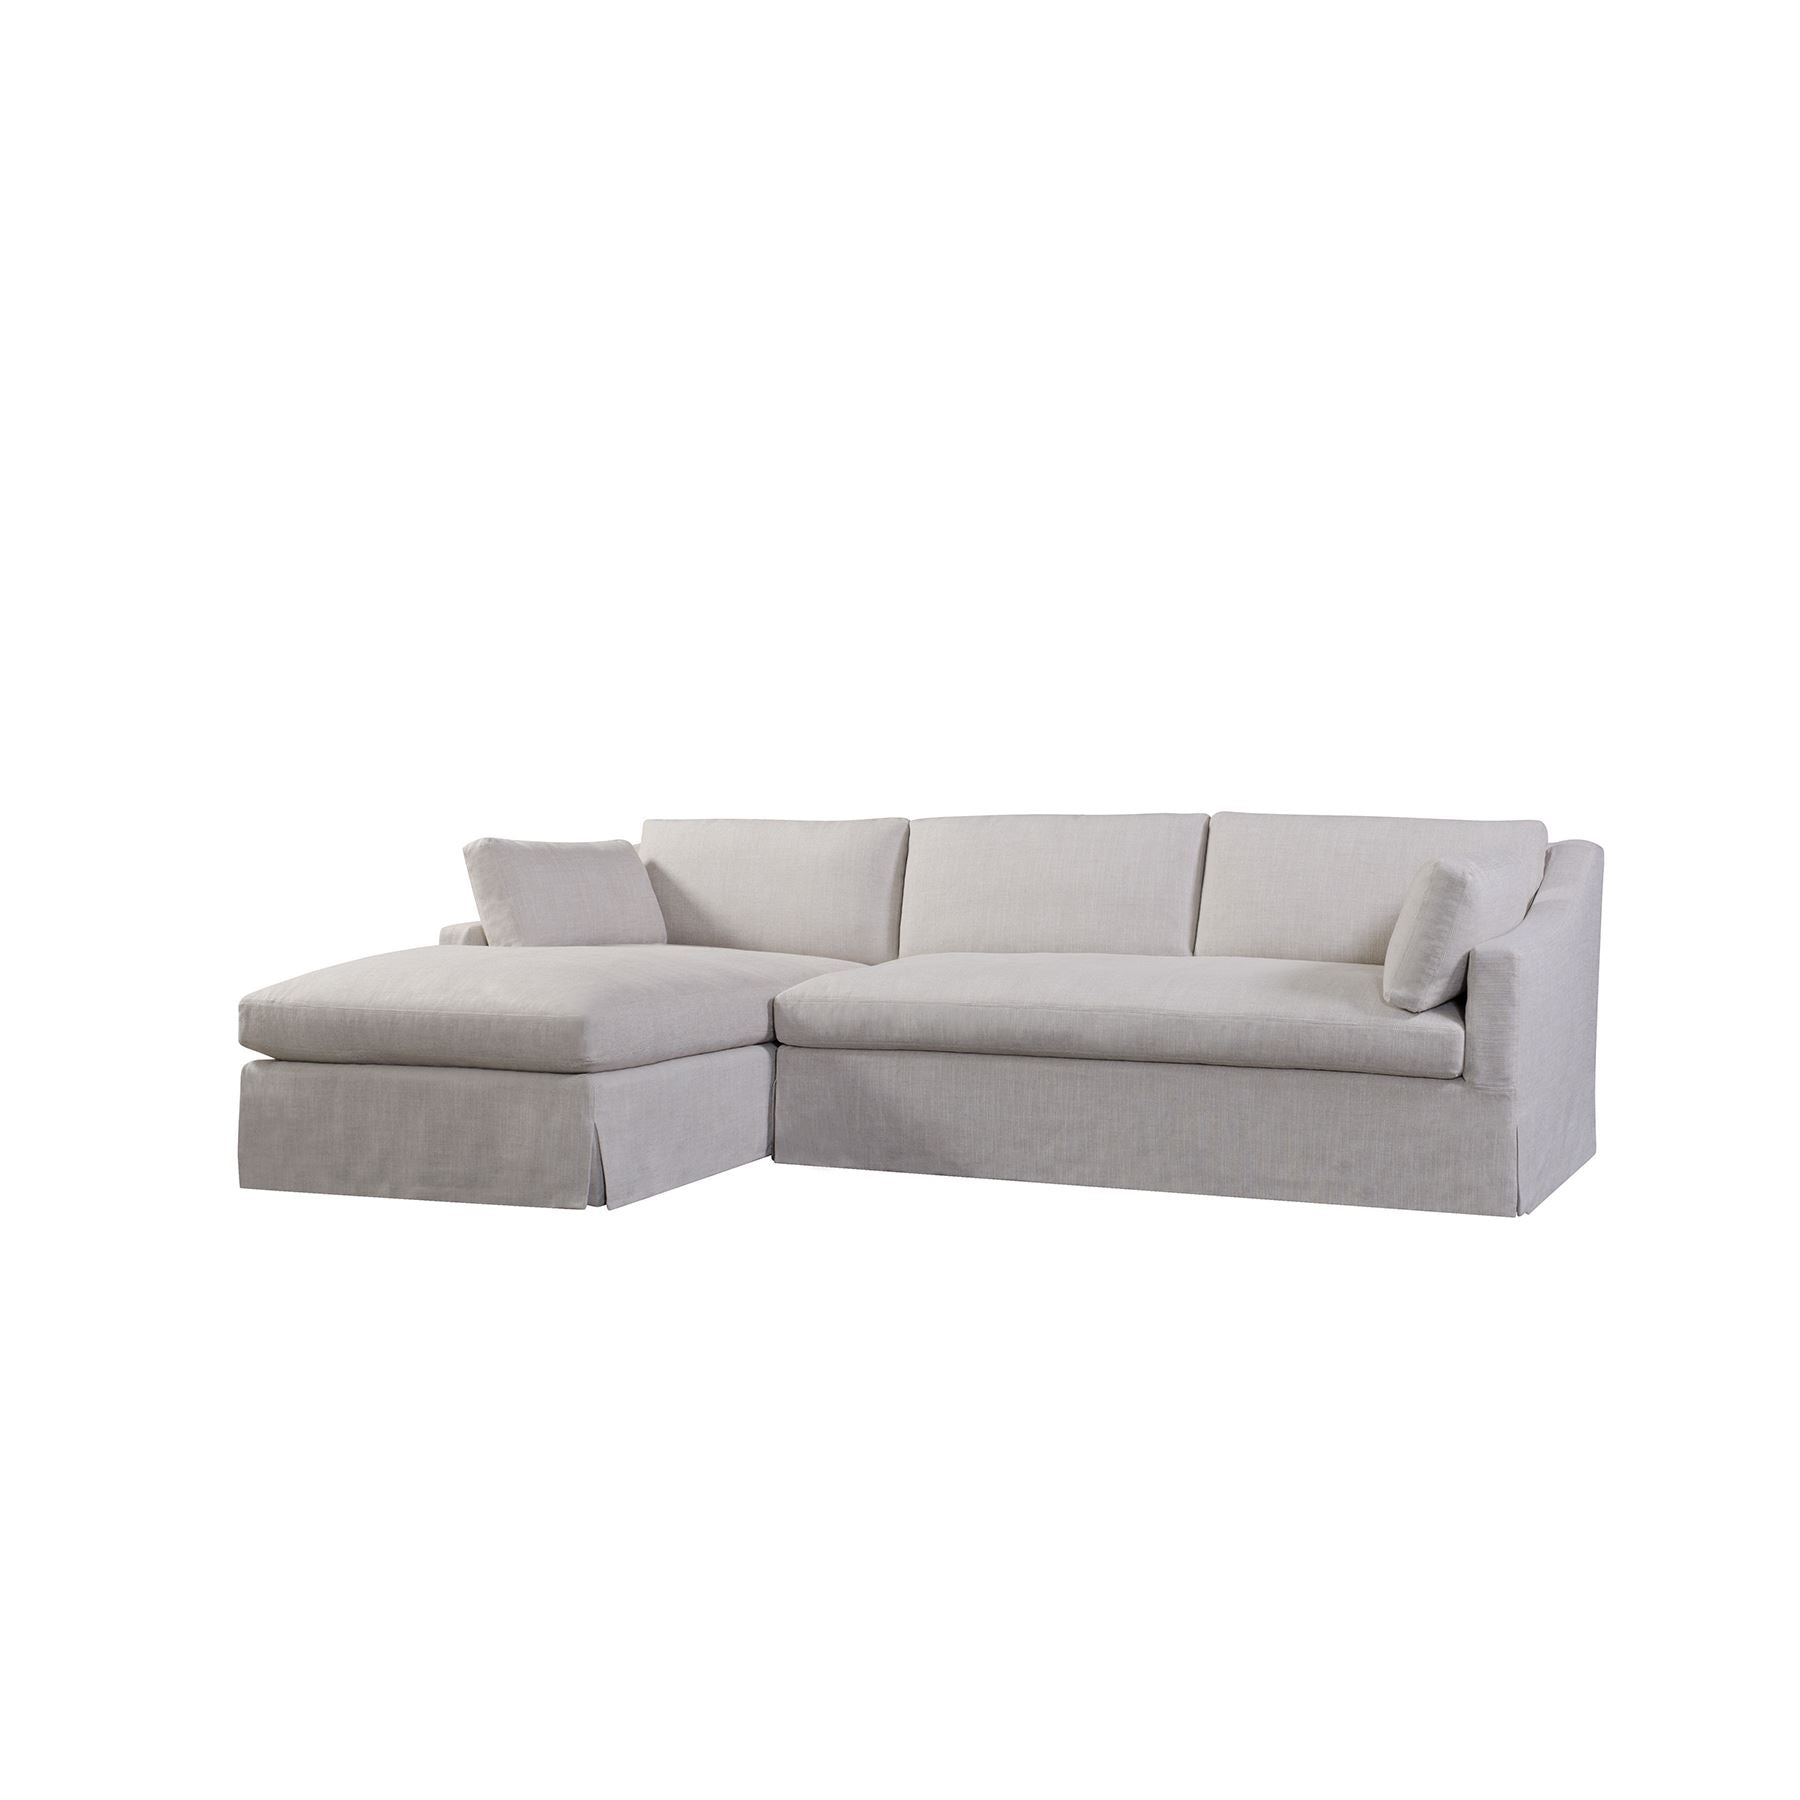 Franklin Slipcovered Sectional Sofa with Left Chaise by Huck & Peck SOFA Huck and Peck